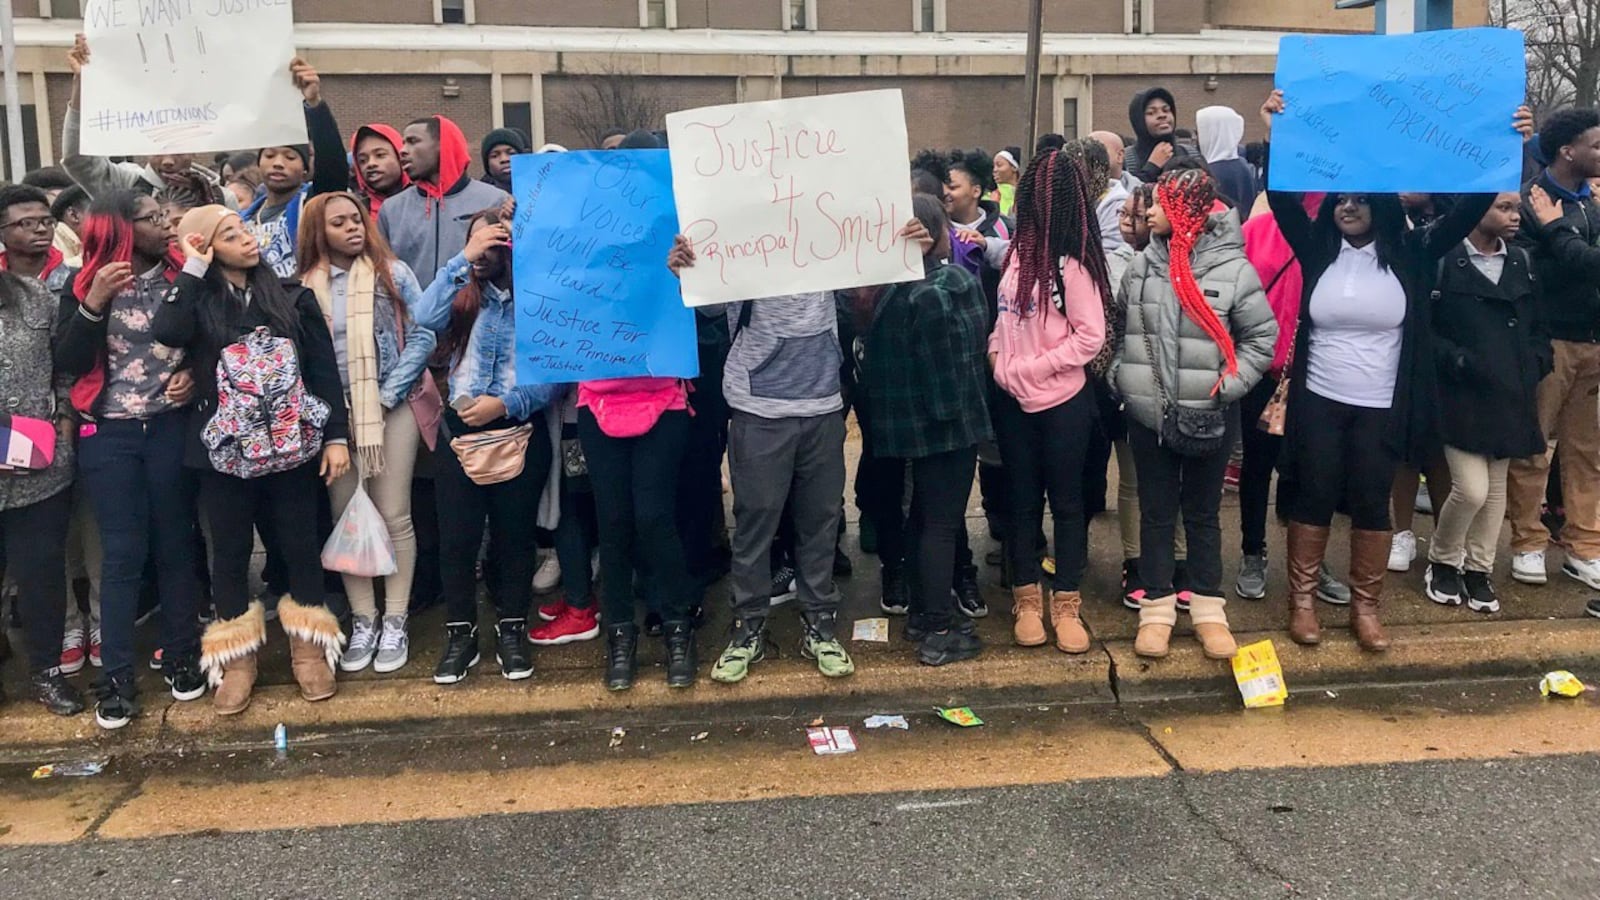 During the protest, students held up signs that read “Justice for Principal Smith” and chanted “We want answers” and “We want Smith.”